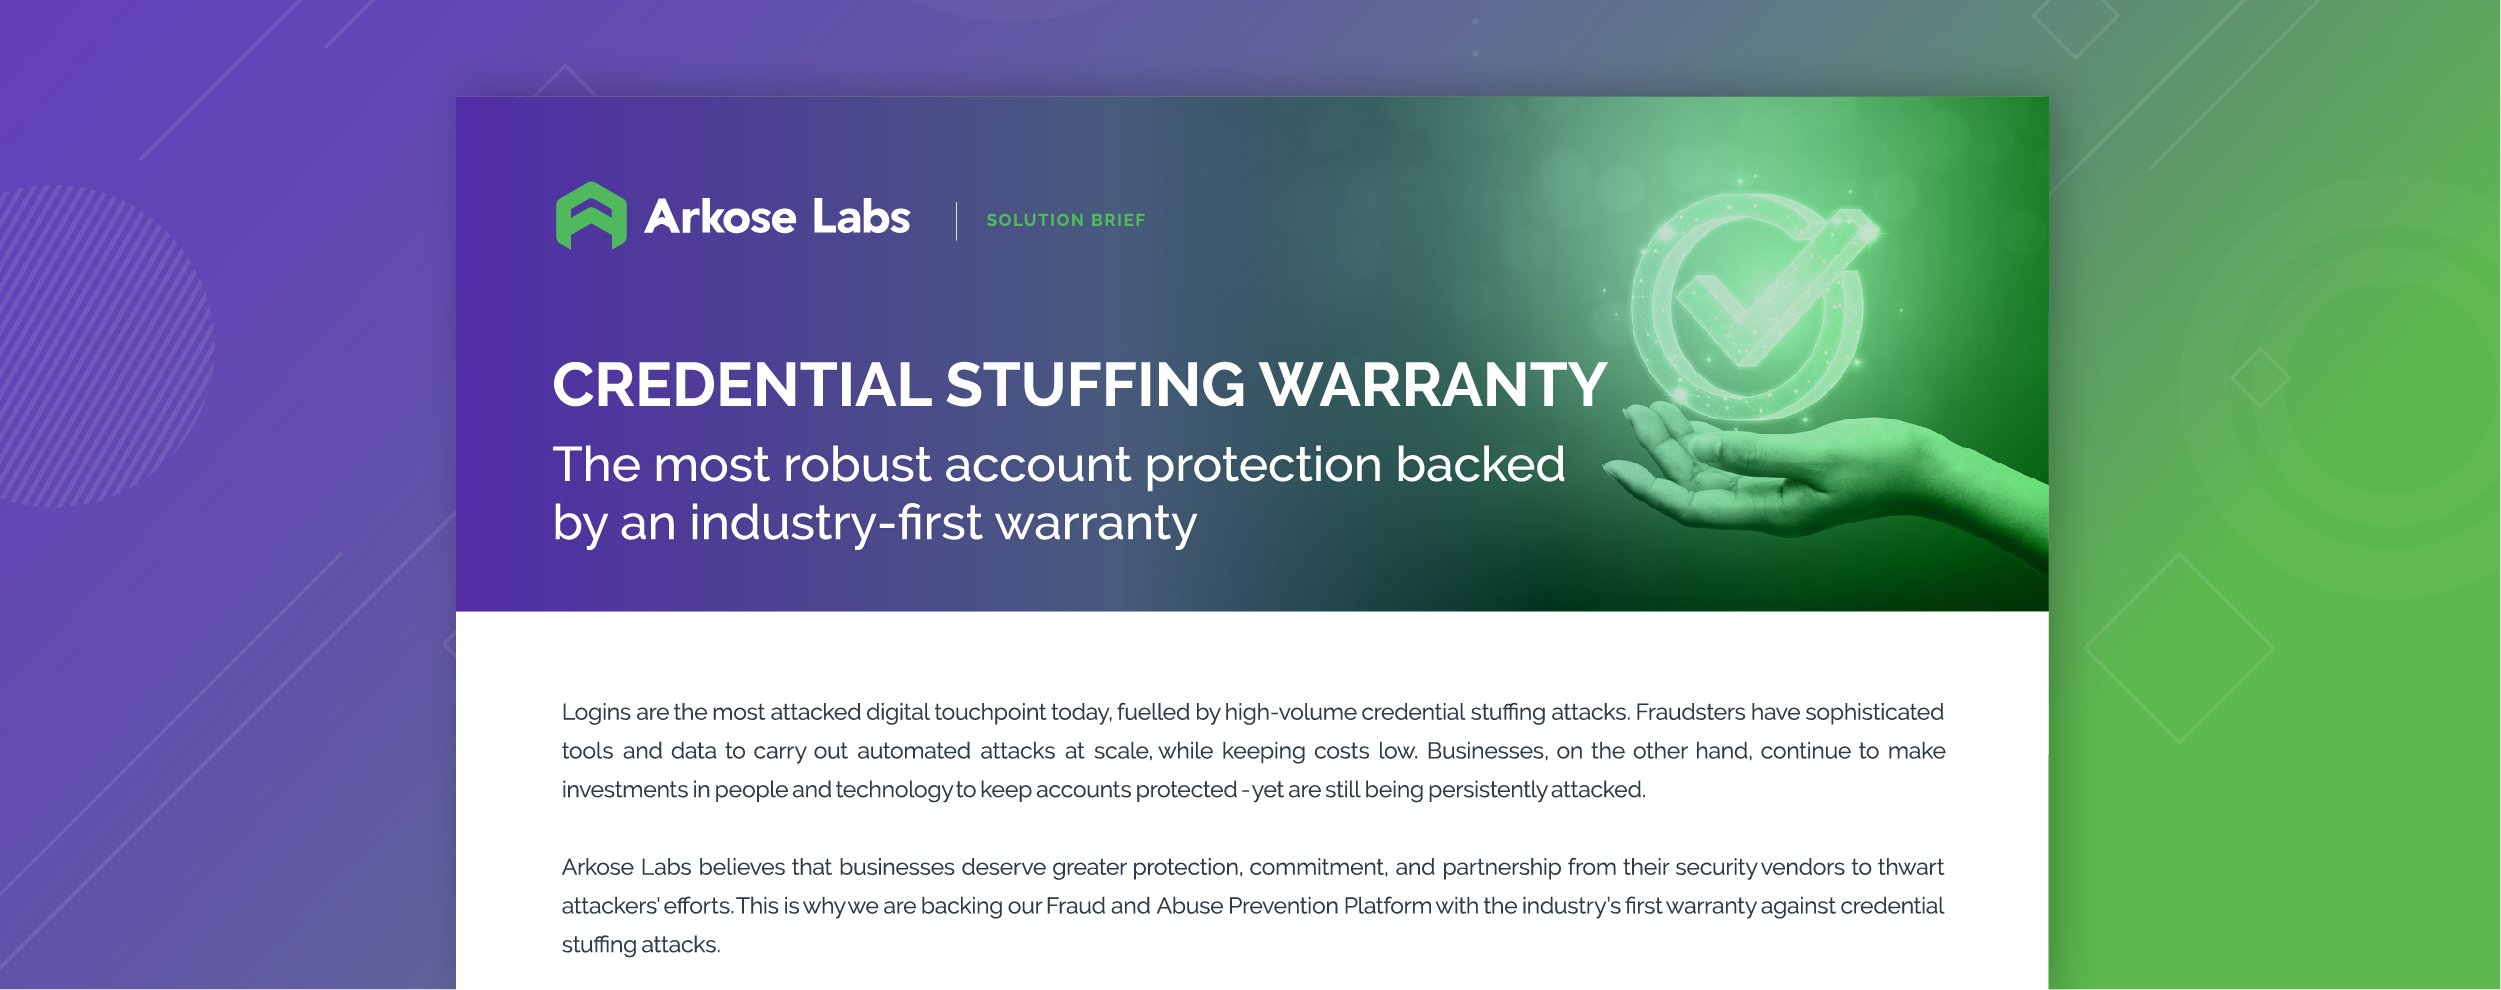 Arkose Labs $1M Credential Stuffing Warranty